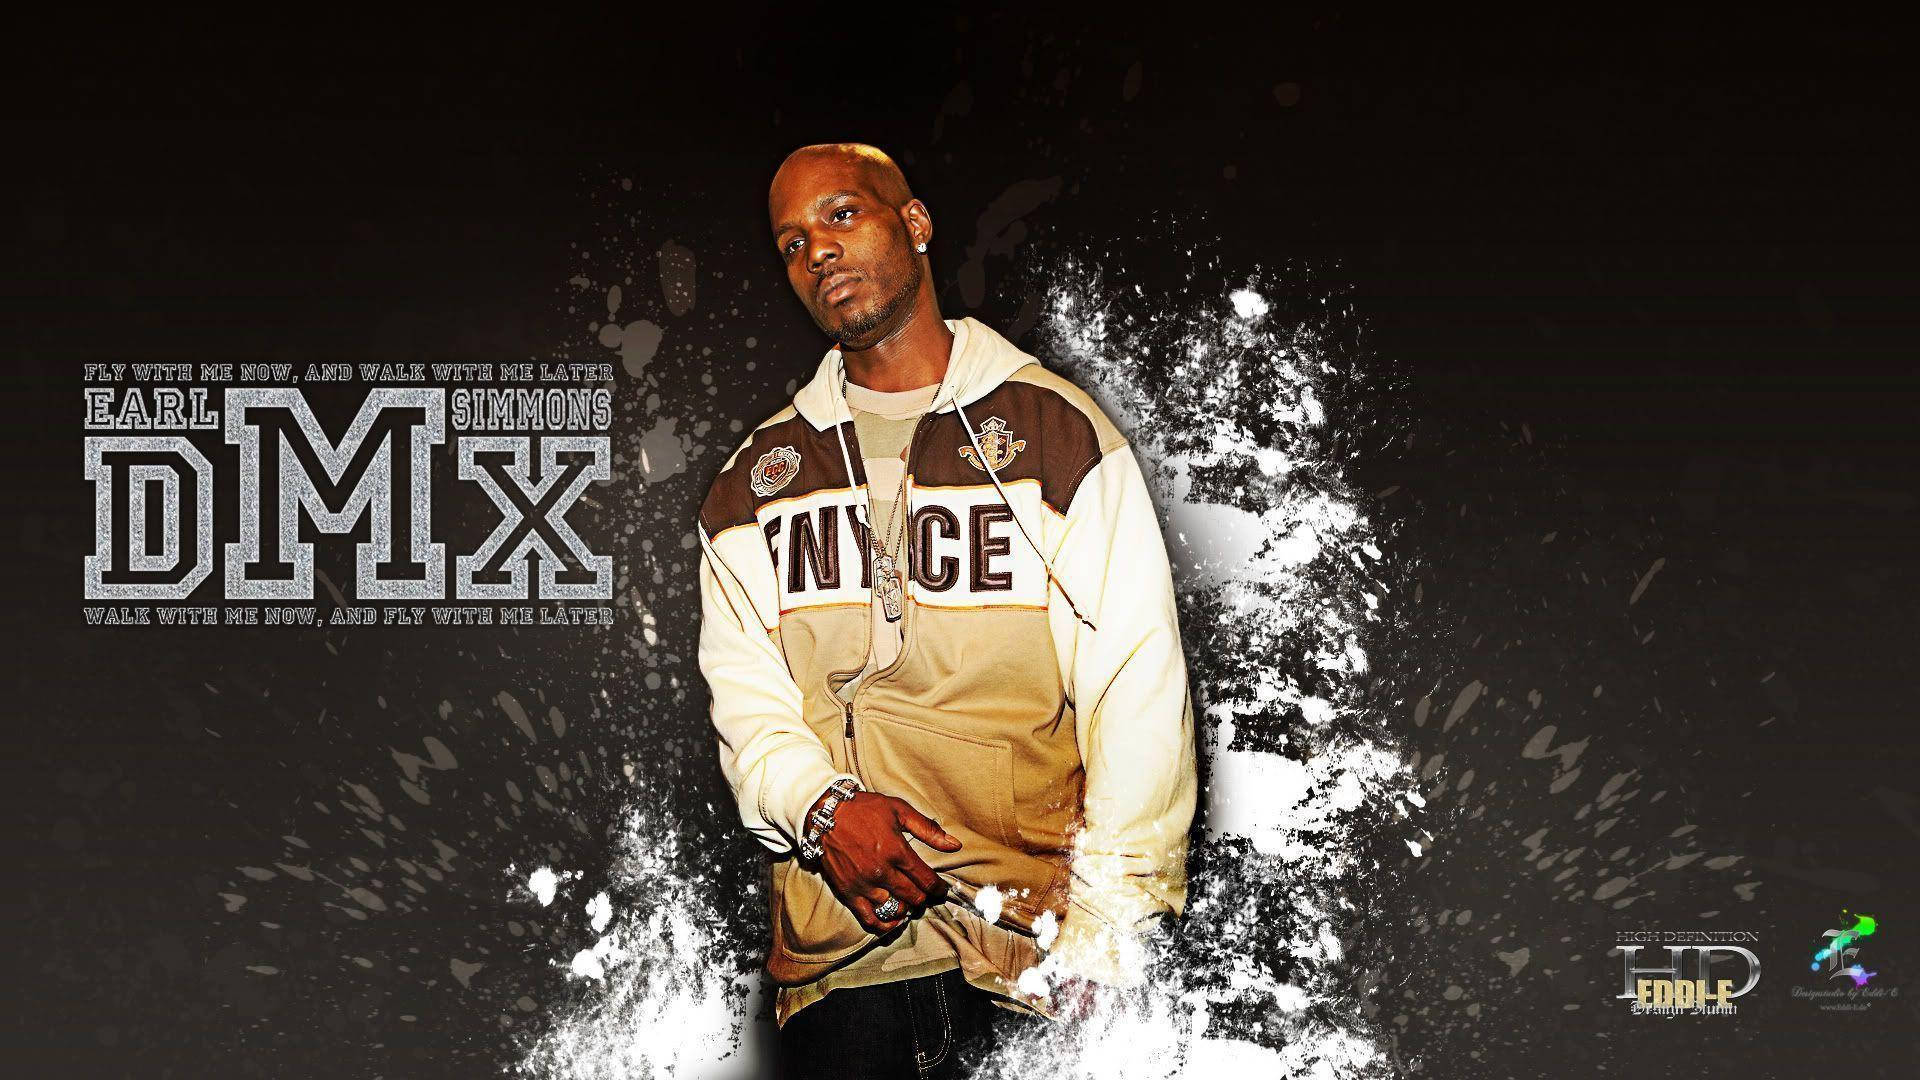 Actor And Rapper Dmx Background